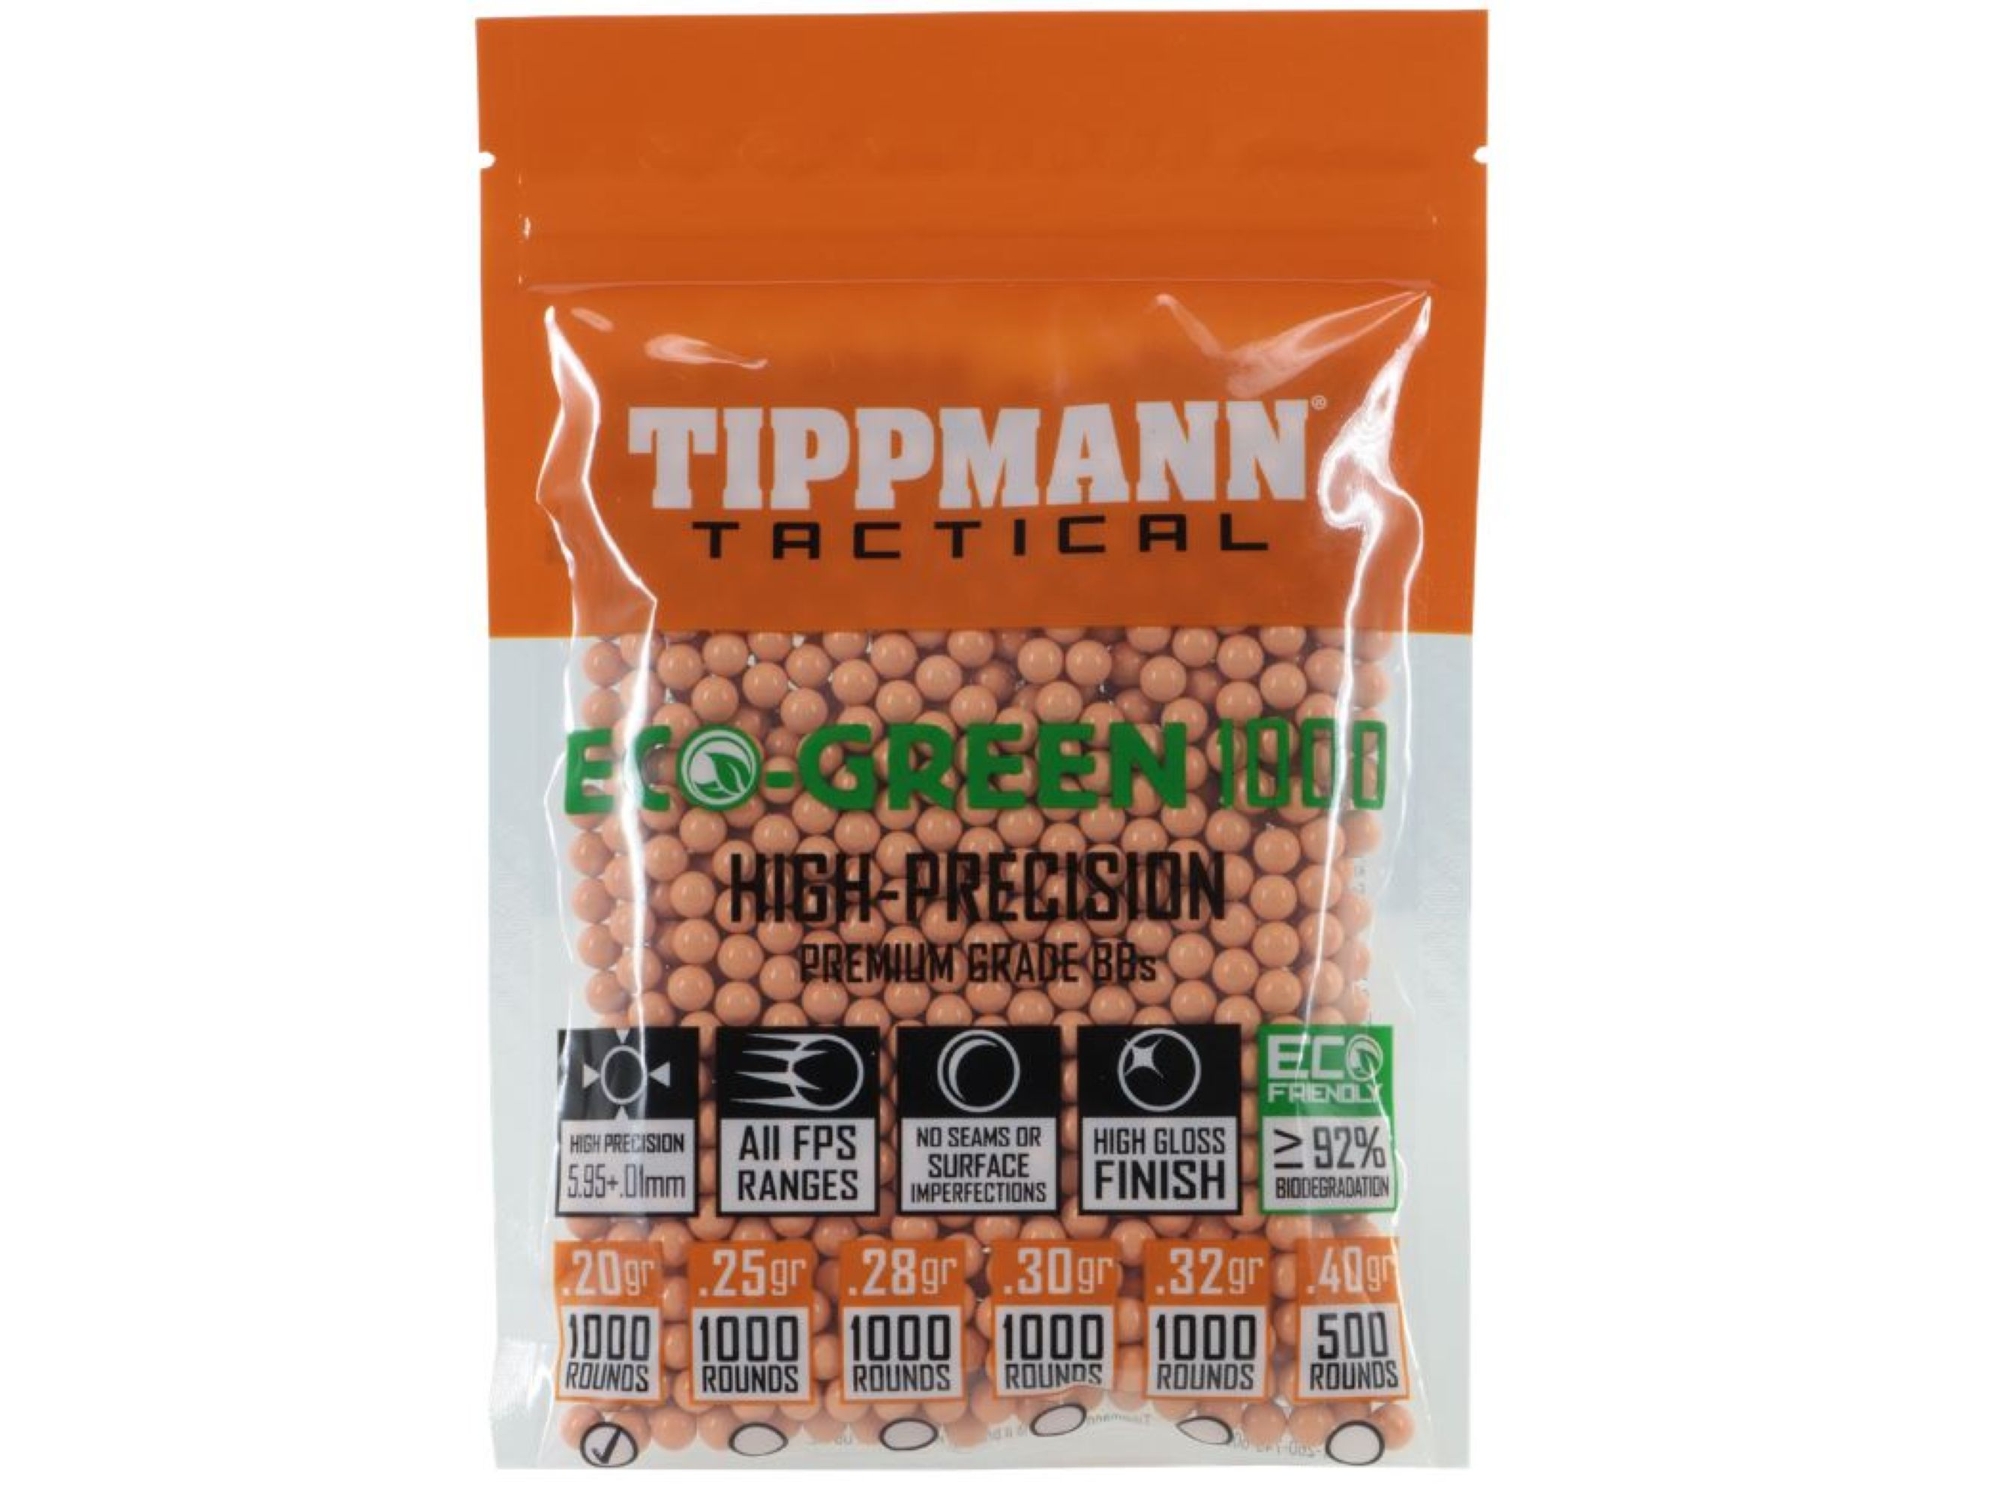 Tippmann Tactical Airsoft BB Eco 1000ct 20g Orange, 6mm, 1000 Count 6mm